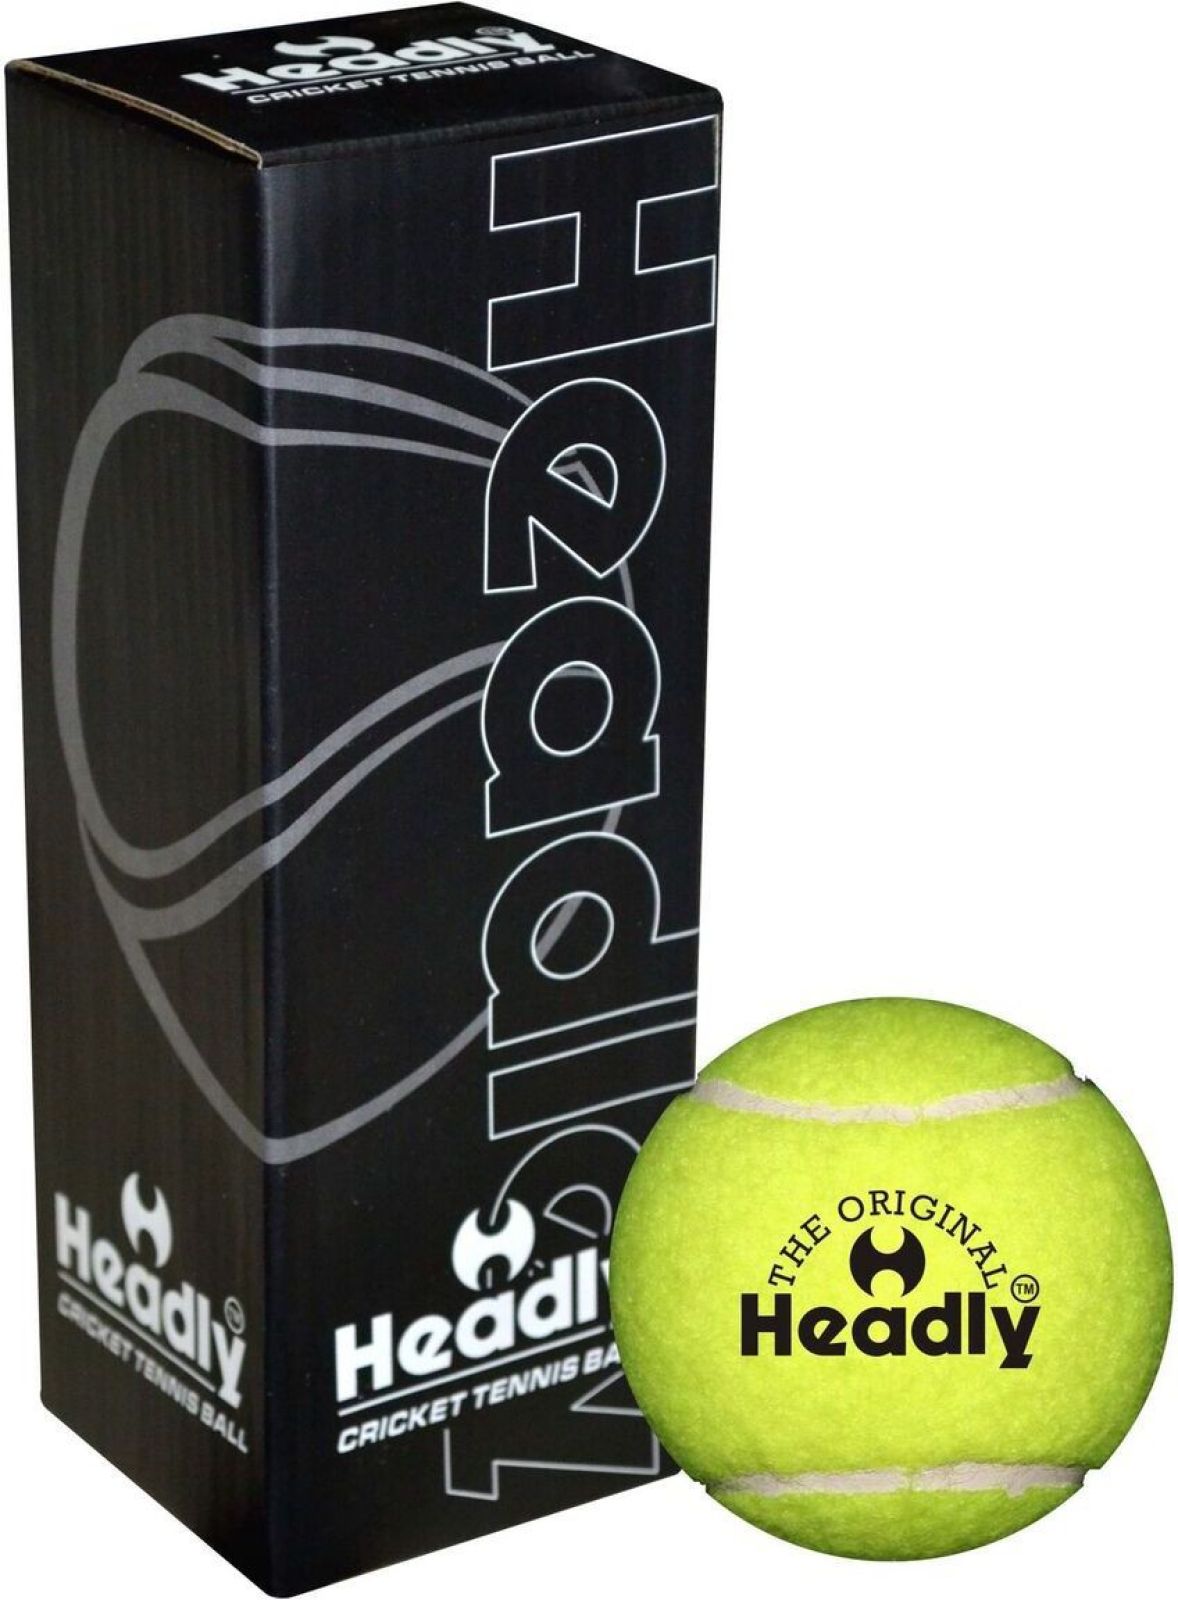 Headly Heavy Cricket Tennis Ball (Pack of 3, Yellow) at Rs 153 only